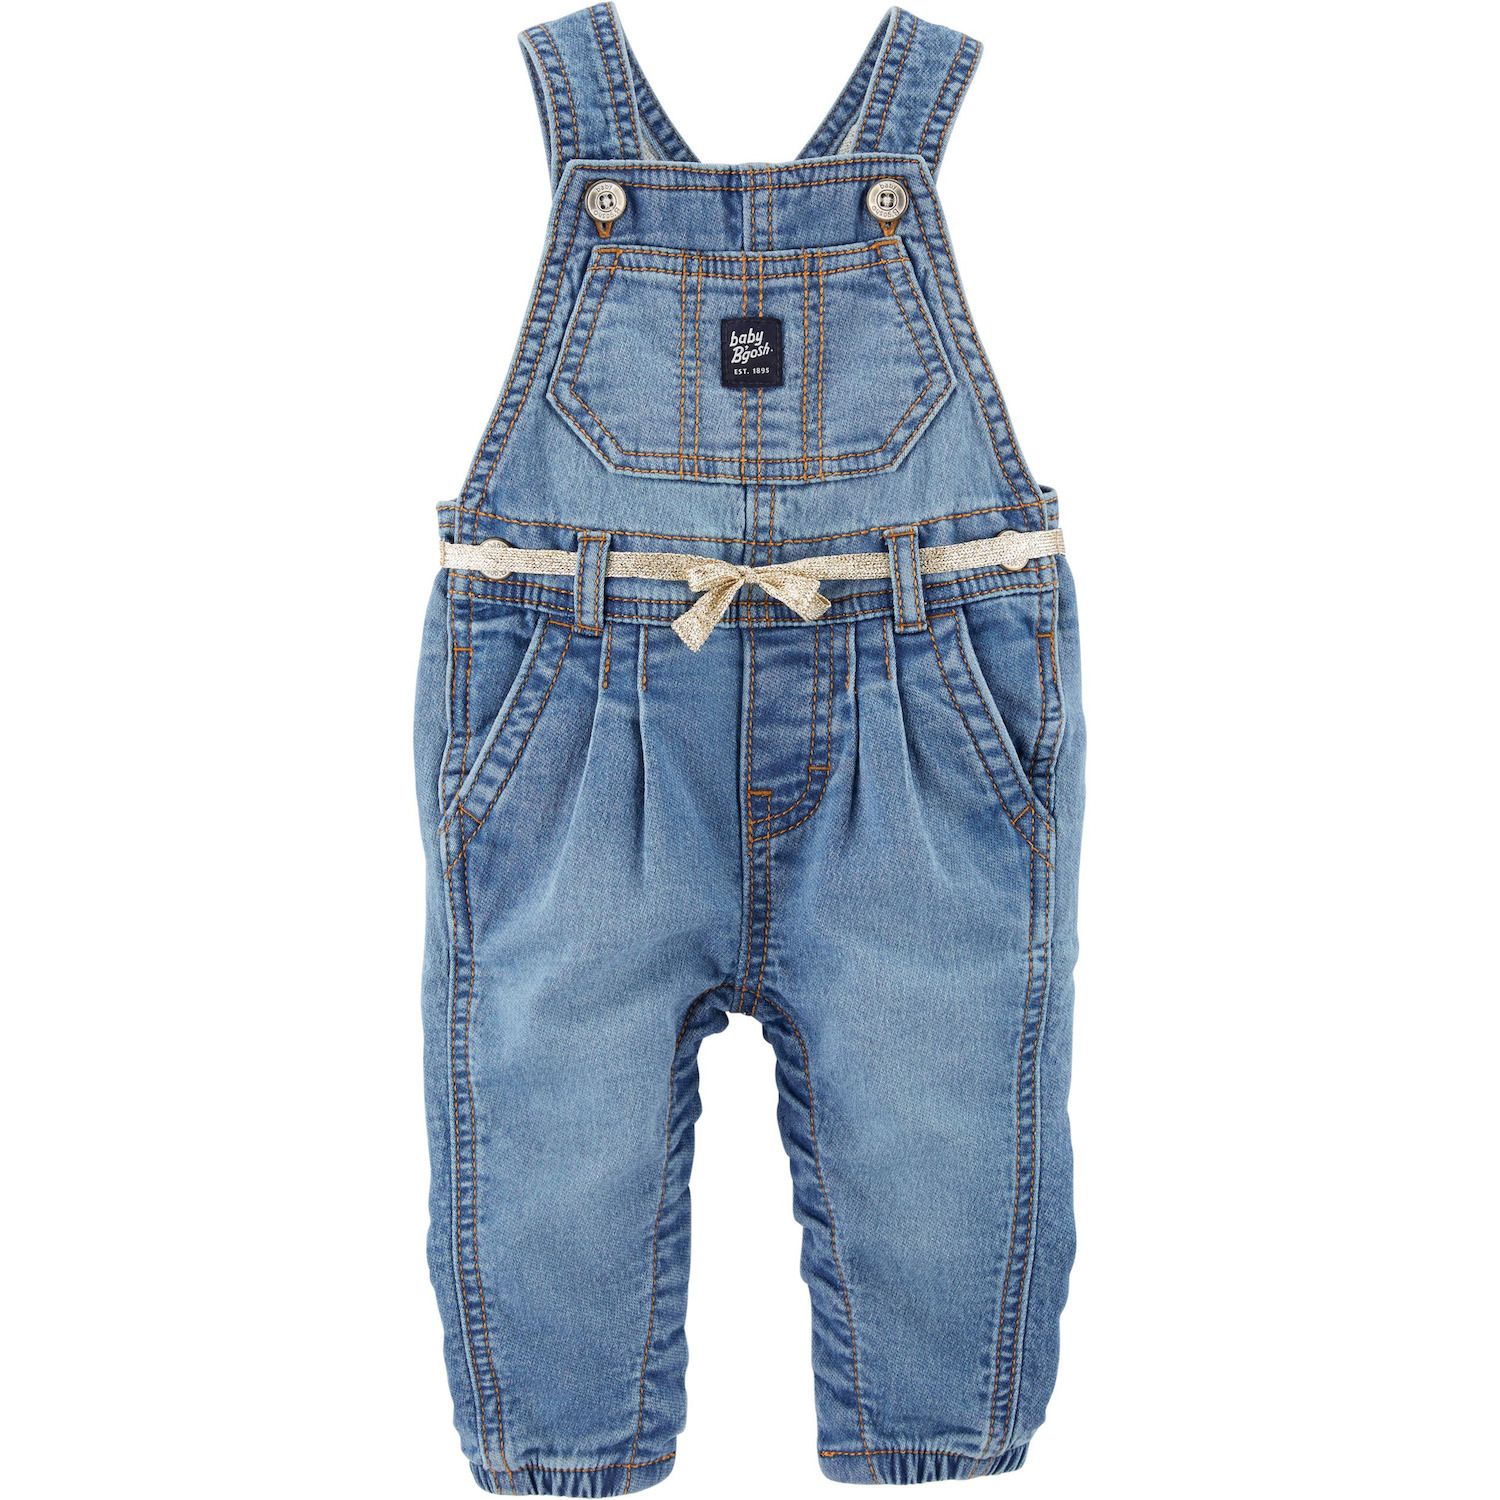 overalls for baby girl